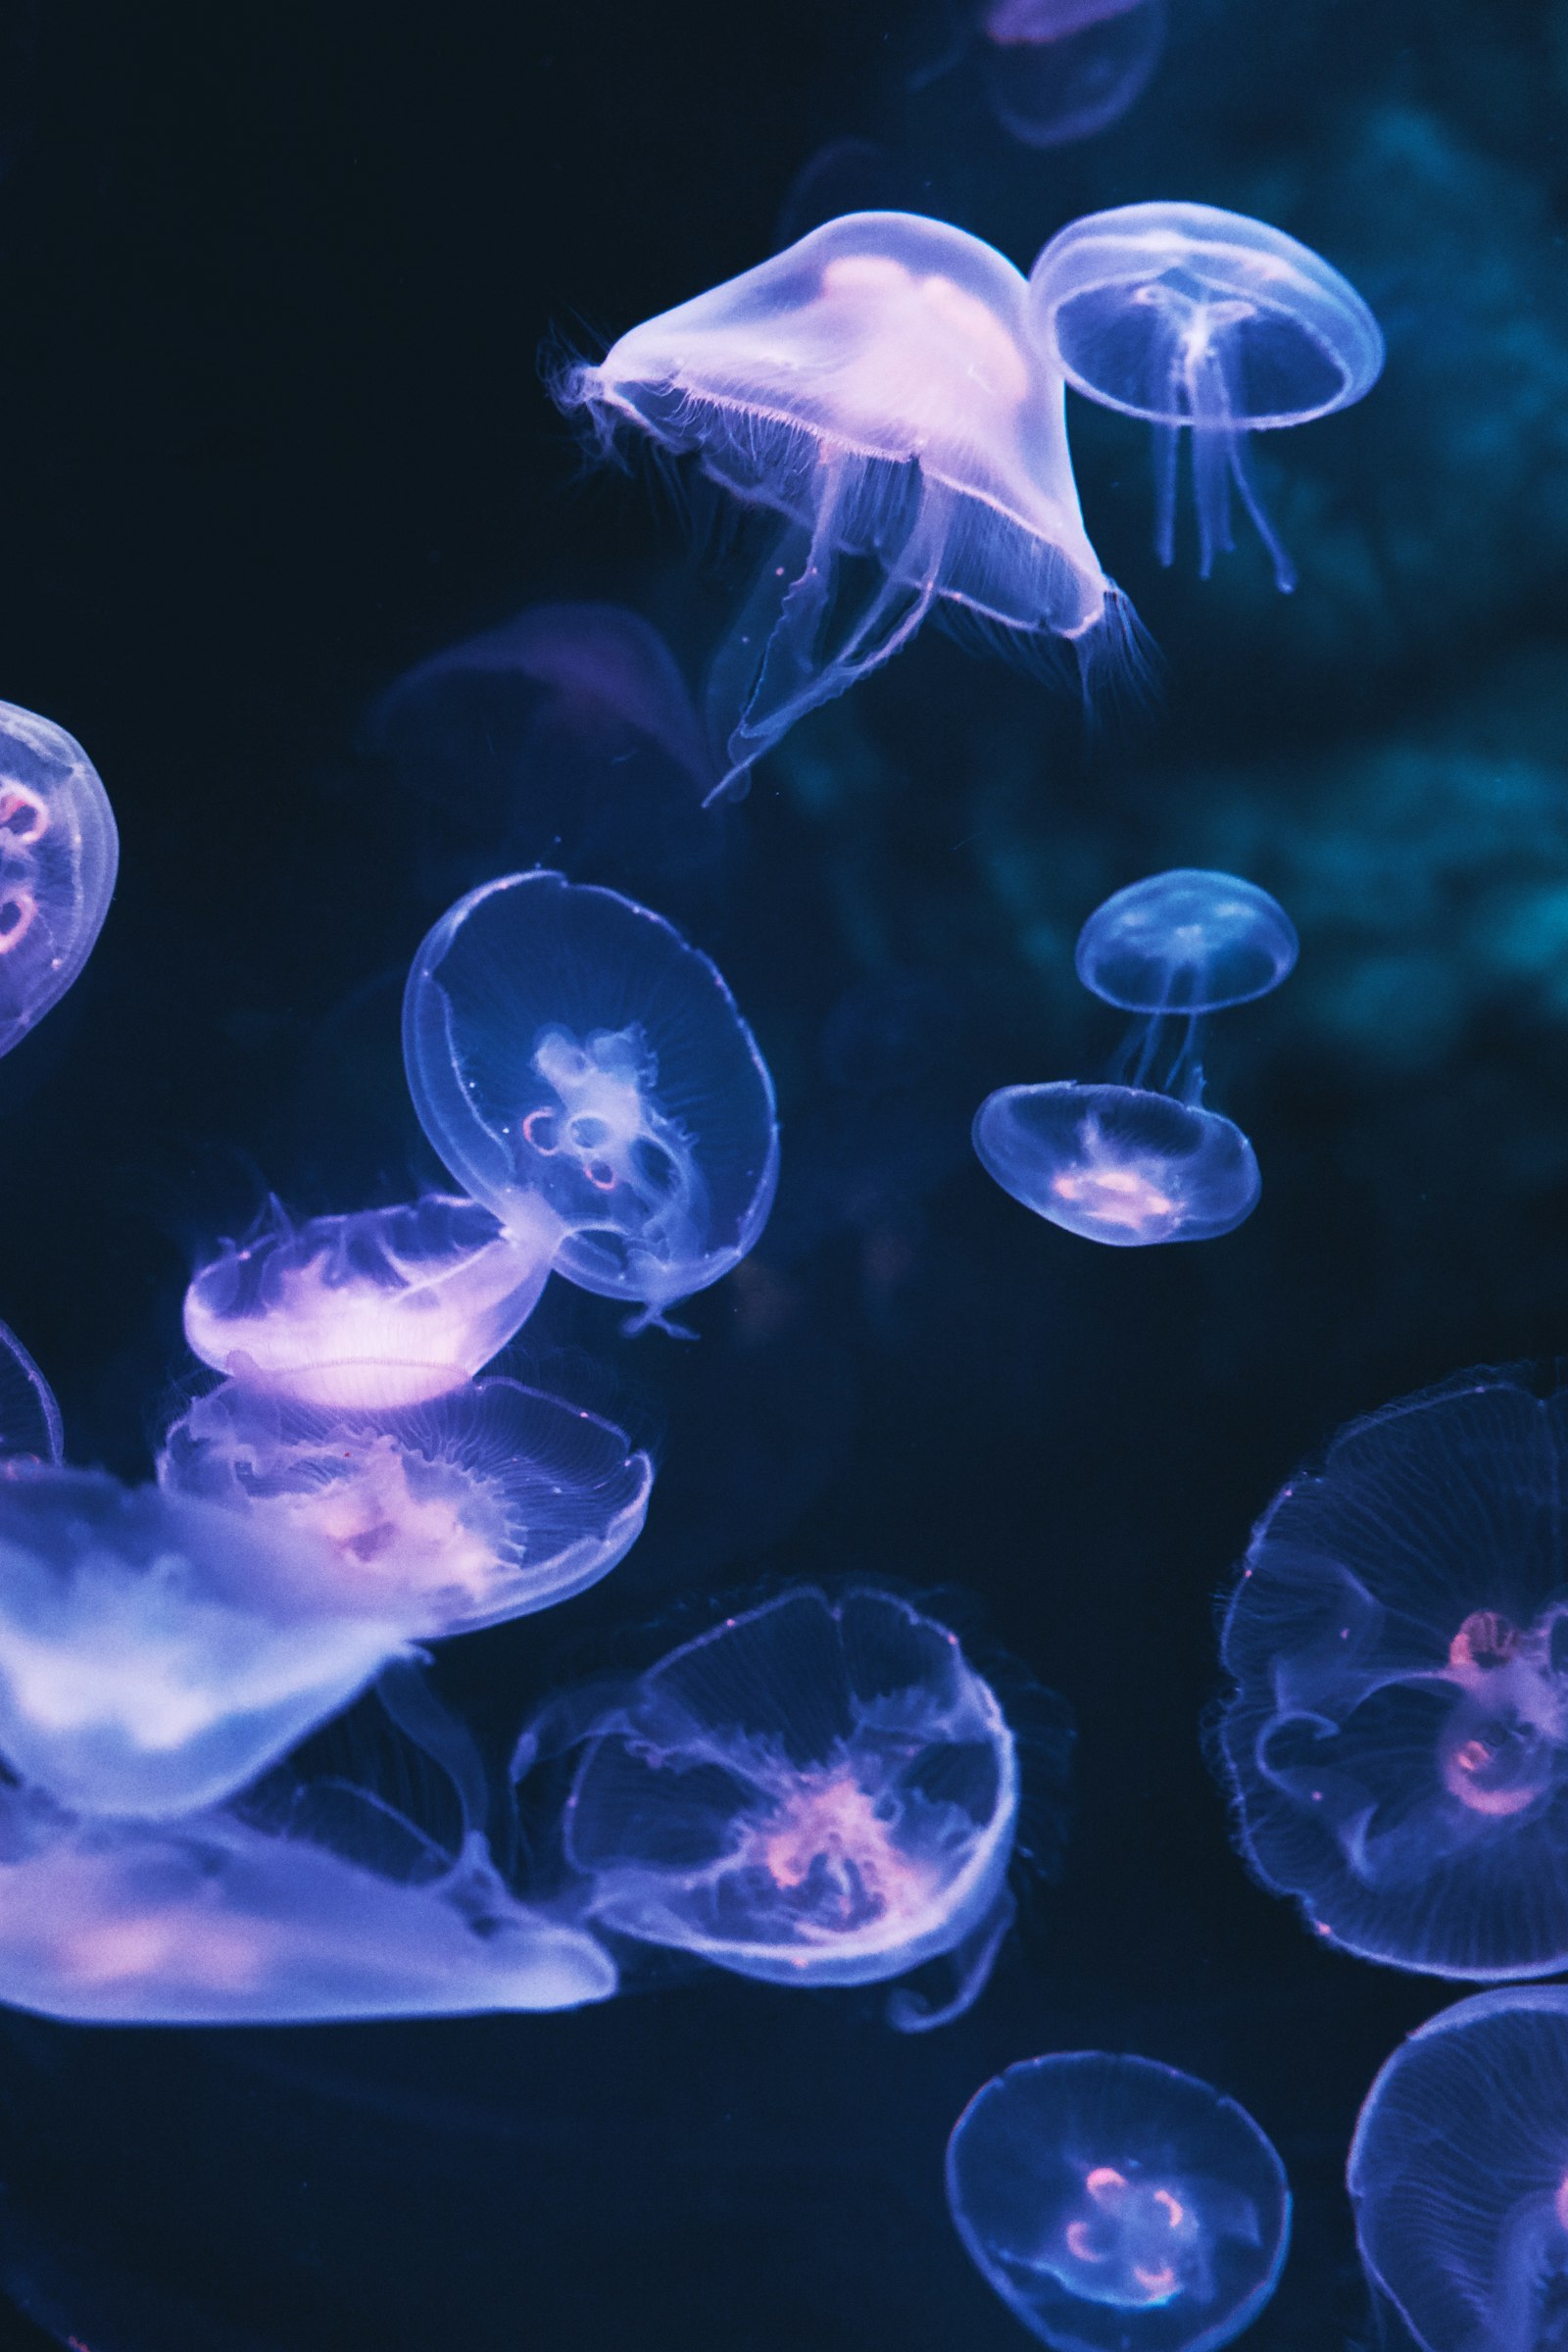 Sony a7 II + Sony FE 28-70mm F3.5-5.6 OSS sample photo. White and blue jellyfish photography